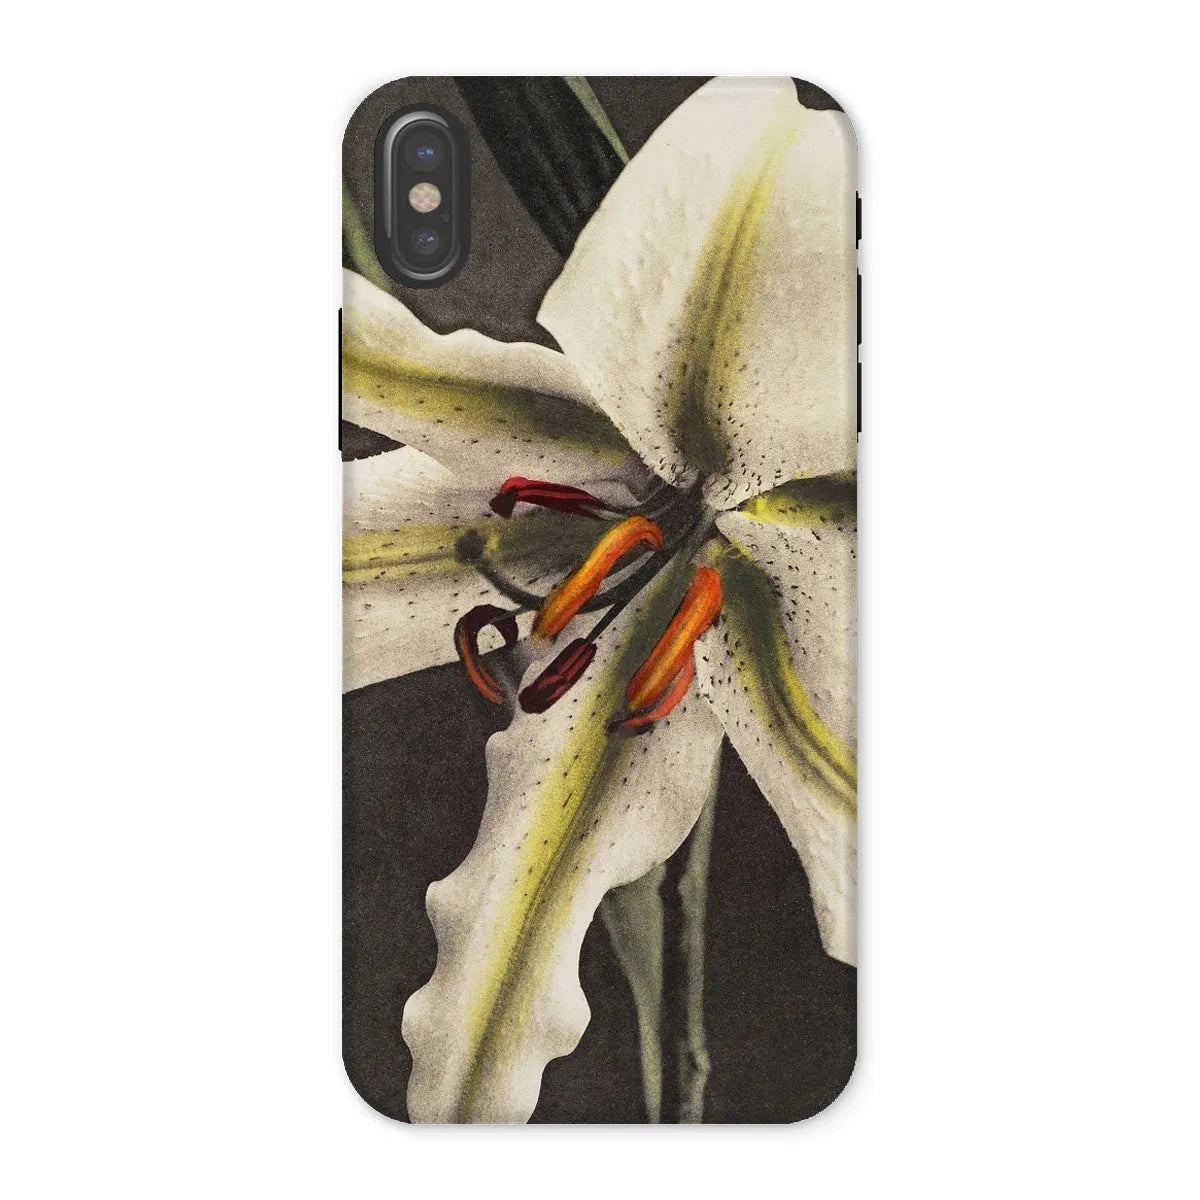 Lily By Kazumasa Ogawa Art Phone Case - Iphone x / Matte - Mobile Phone Cases - Aesthetic Art